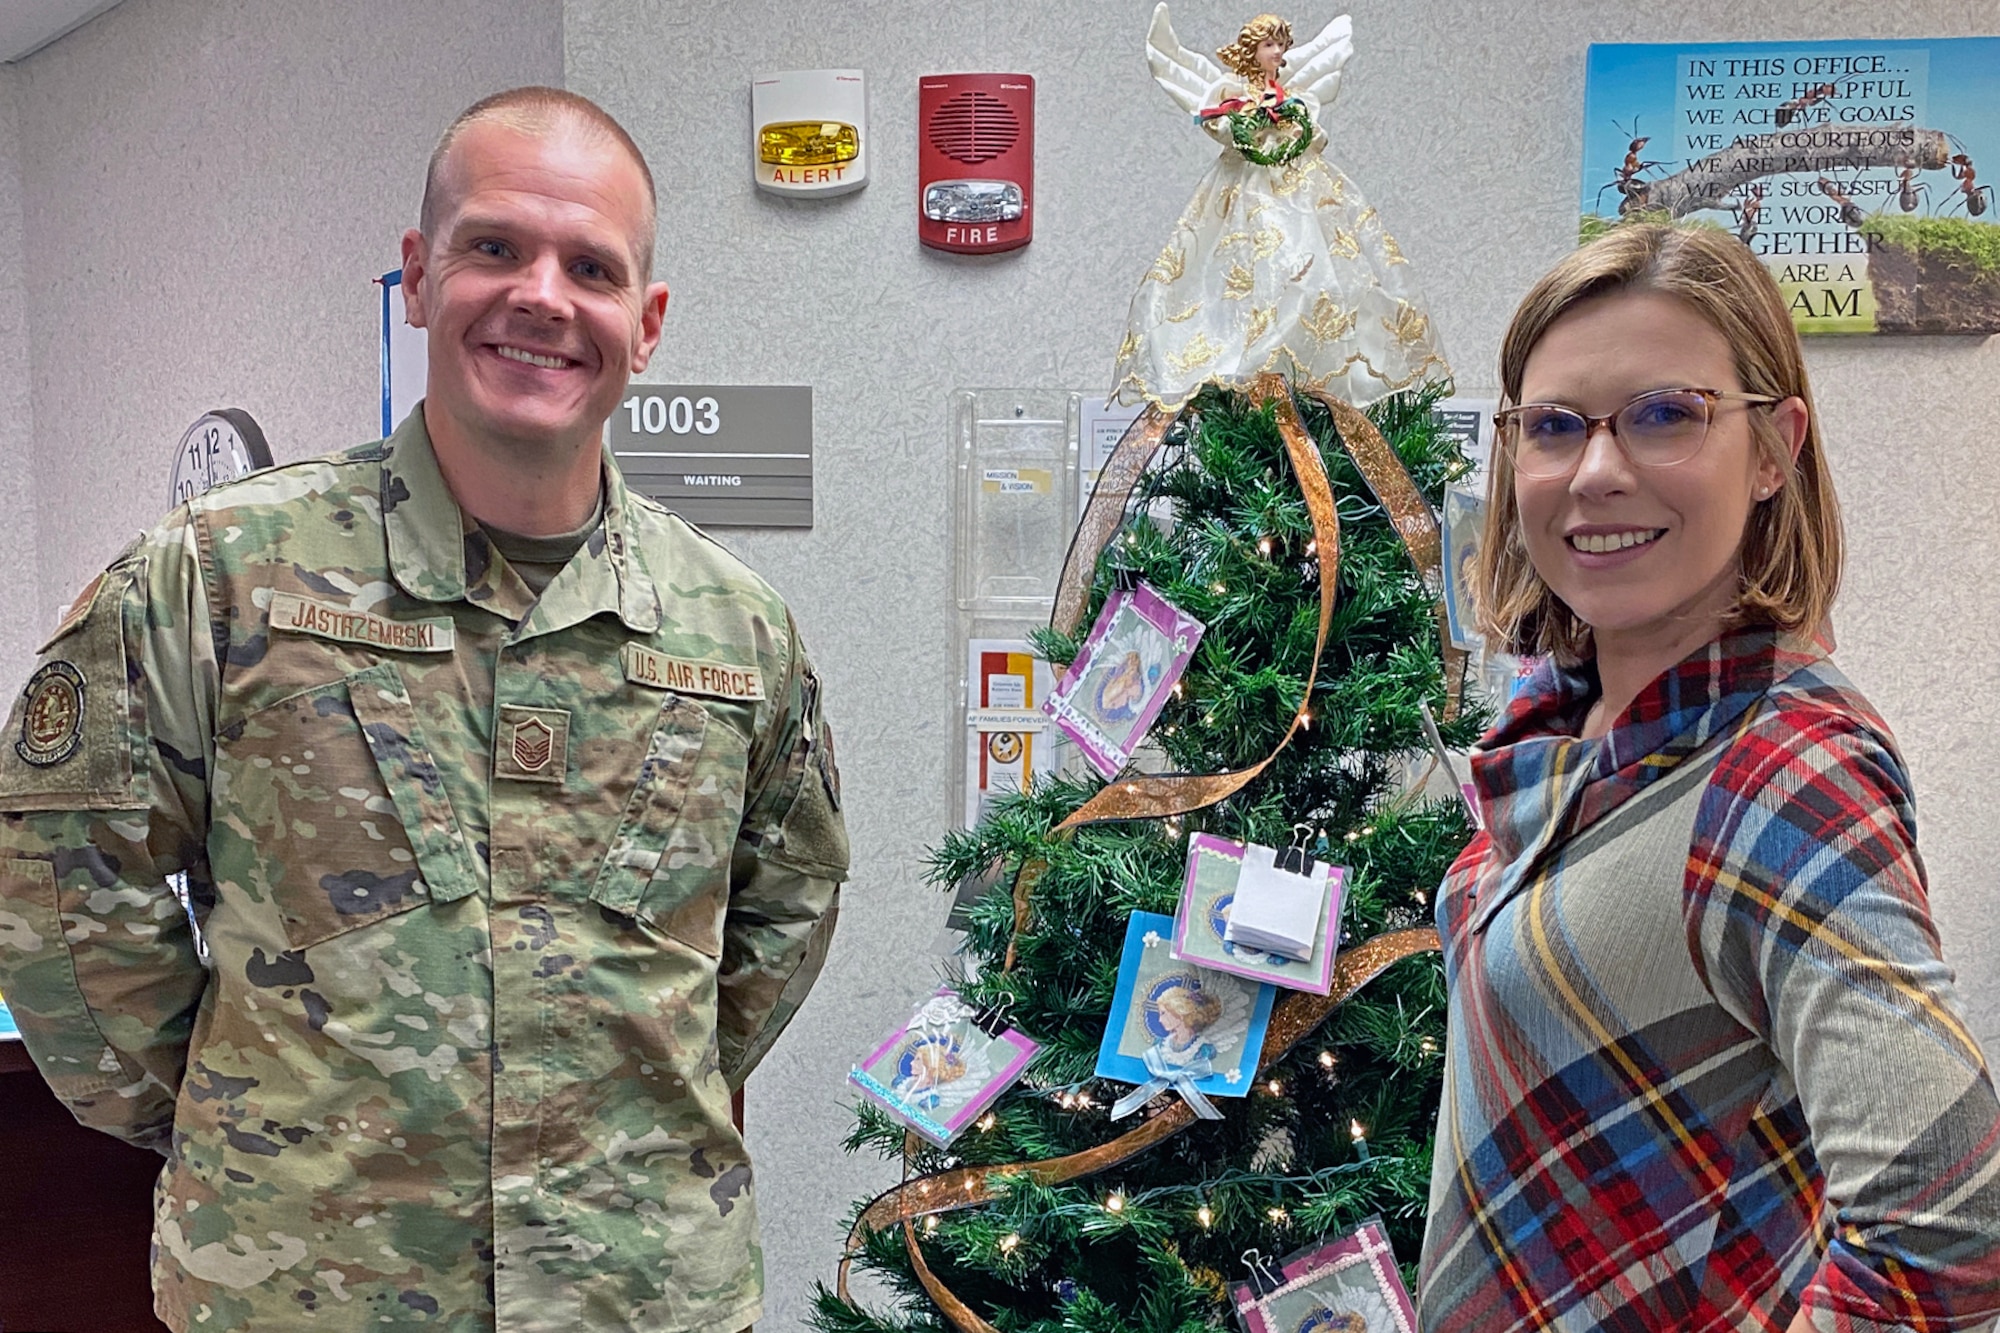 Master Sgt. Jason Jastrzembski, Airman and Family Readiness flight chief, and Stacey Pennington, Airman and Family Readiness program manager pose in front of a Christmas tree at Grissom Air Reserve Base, Ind. on November 6, 2021. The tree, decorated with angels, is symbolic of the "Angel Tree" program that Airmen and Family Readiness runs, which benefits Grissom Airmen and civilians around the holidays with anonymous gift donations. (U.S. Air Force photo by Master. Sgt. Rachel Barton)